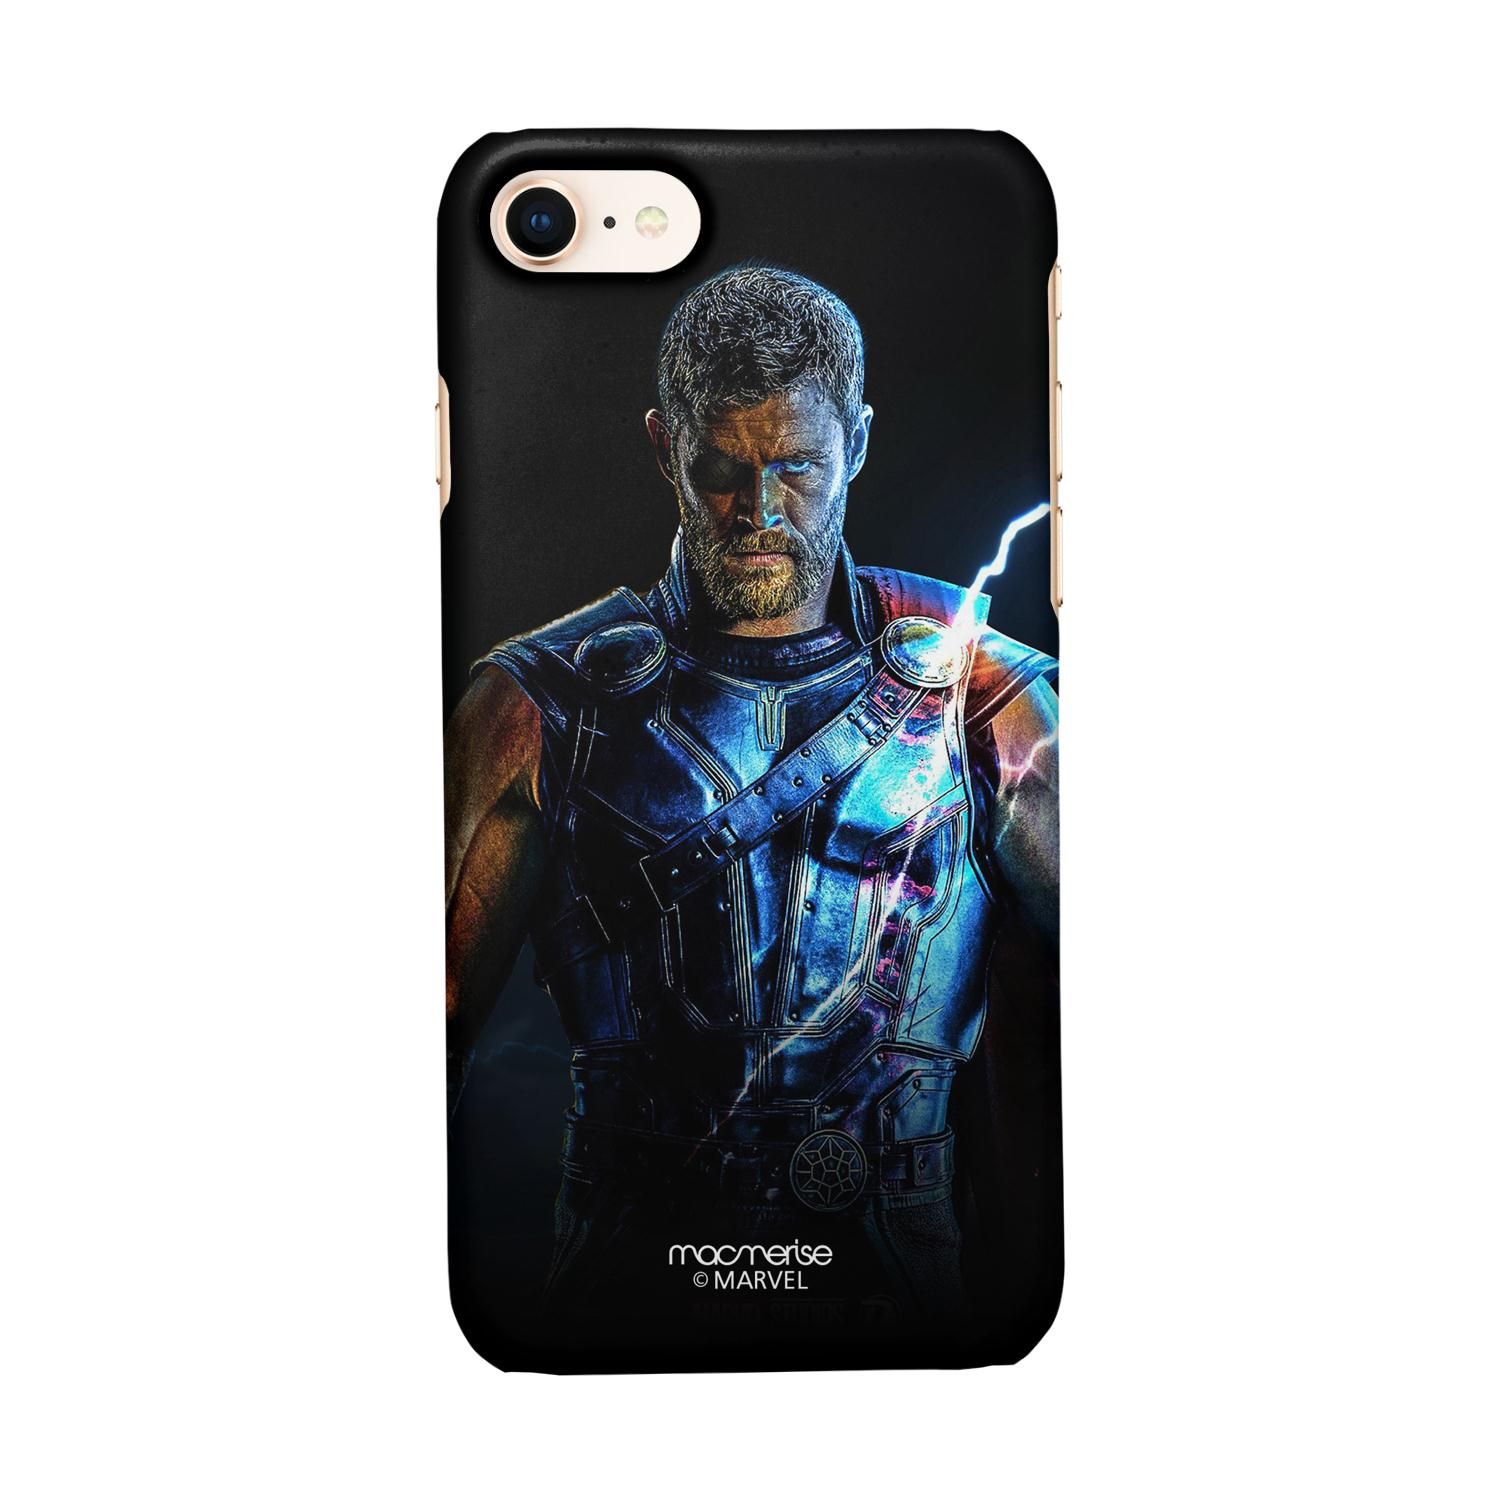 Buy The Thor Triumph - Sleek Phone Case for iPhone 7 Online